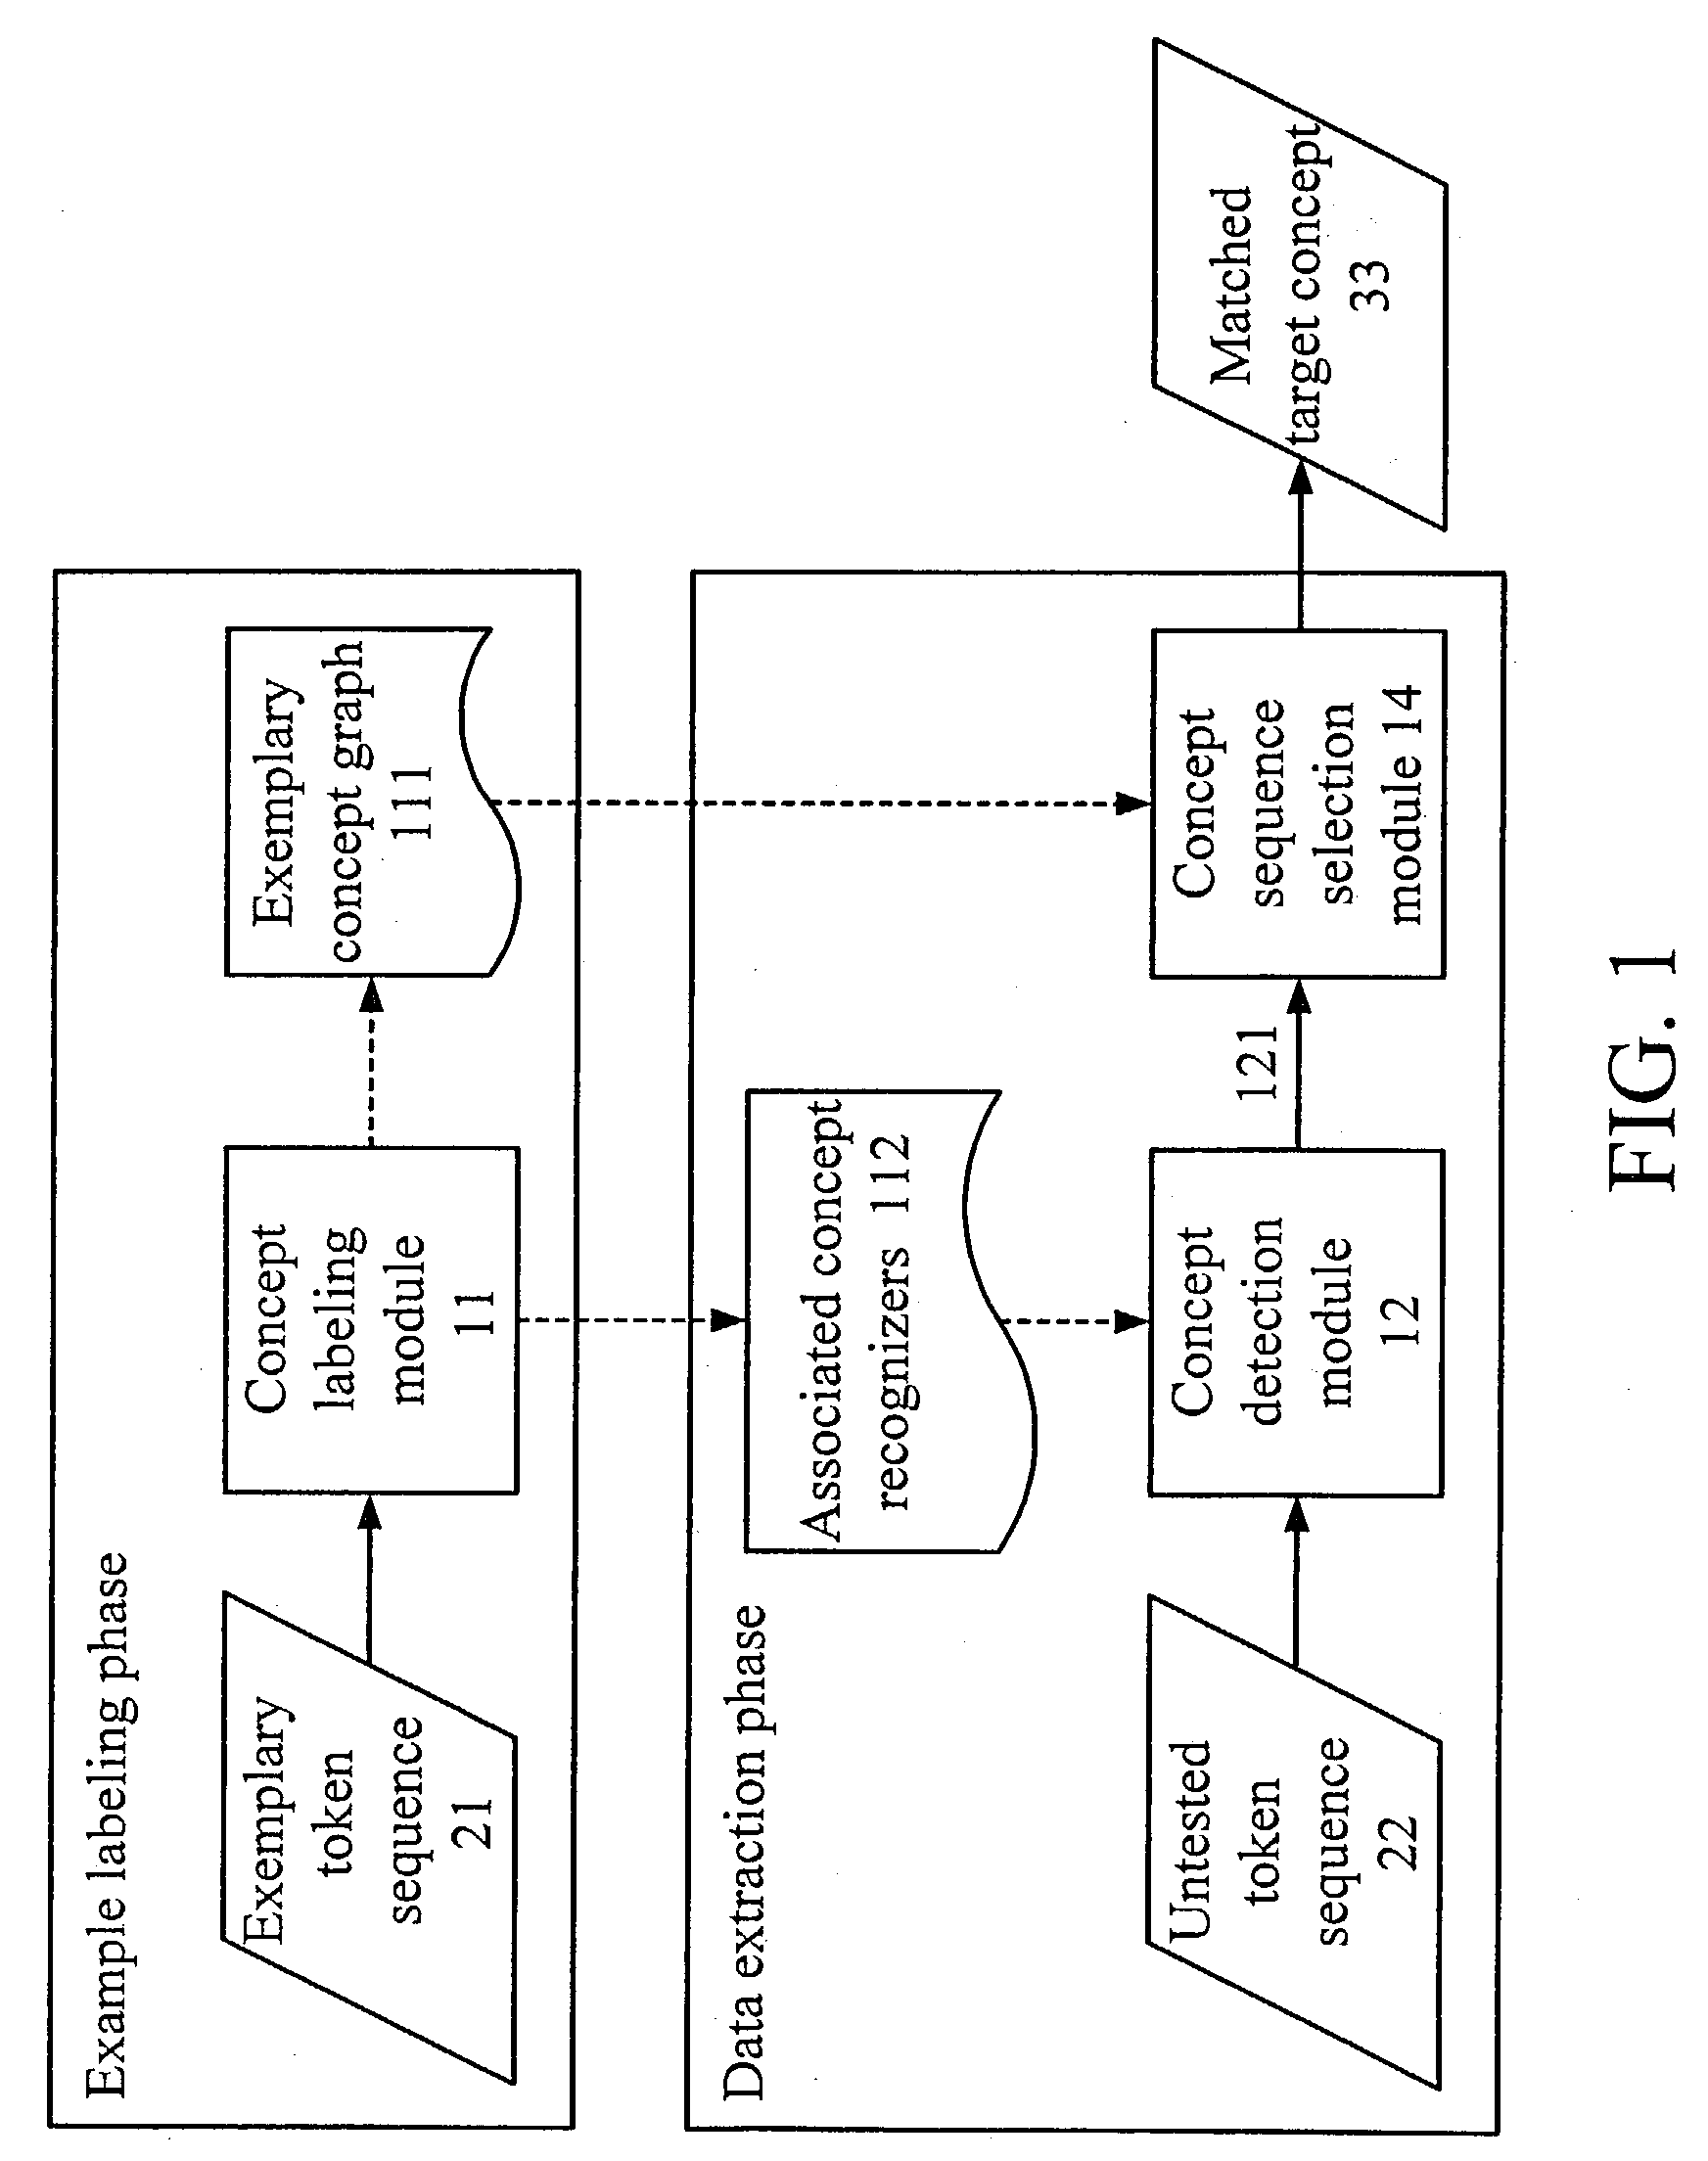 Computer implemented example-based concept-oriented data extraction method